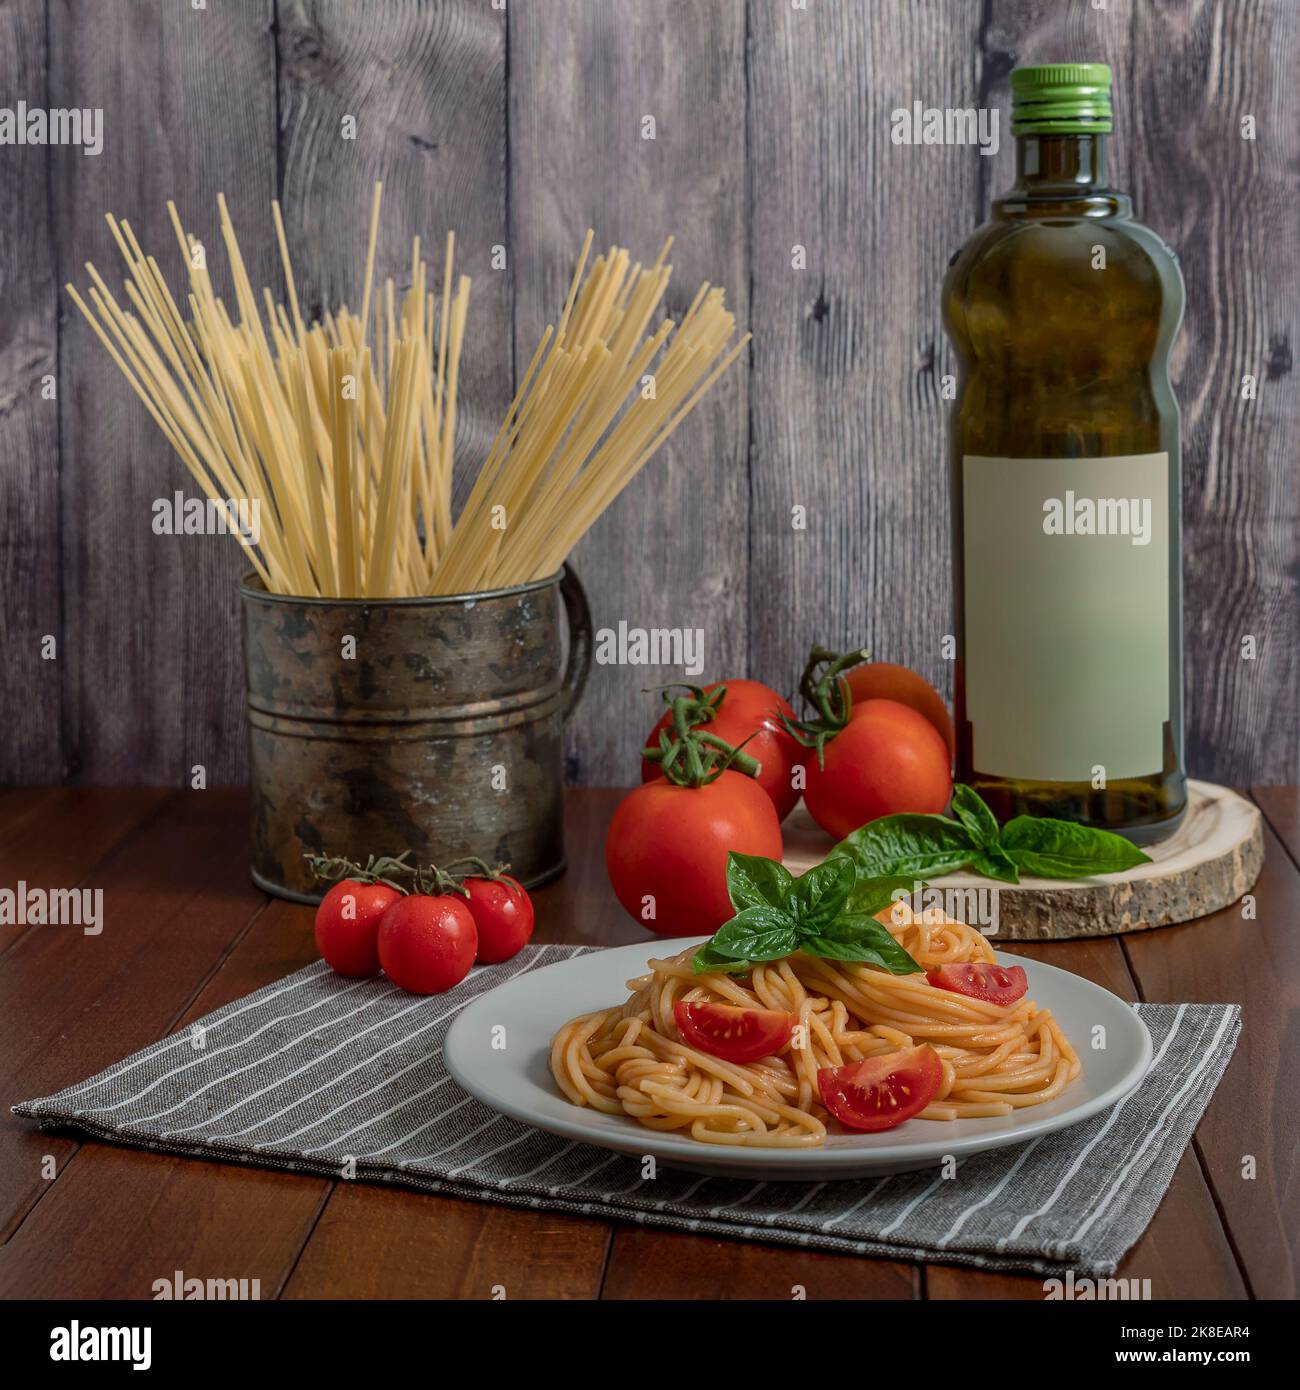 A delicious plate of spaghetti with tomato, basil and extra virgin olive oil, a typical Italian recipe Stock Photo